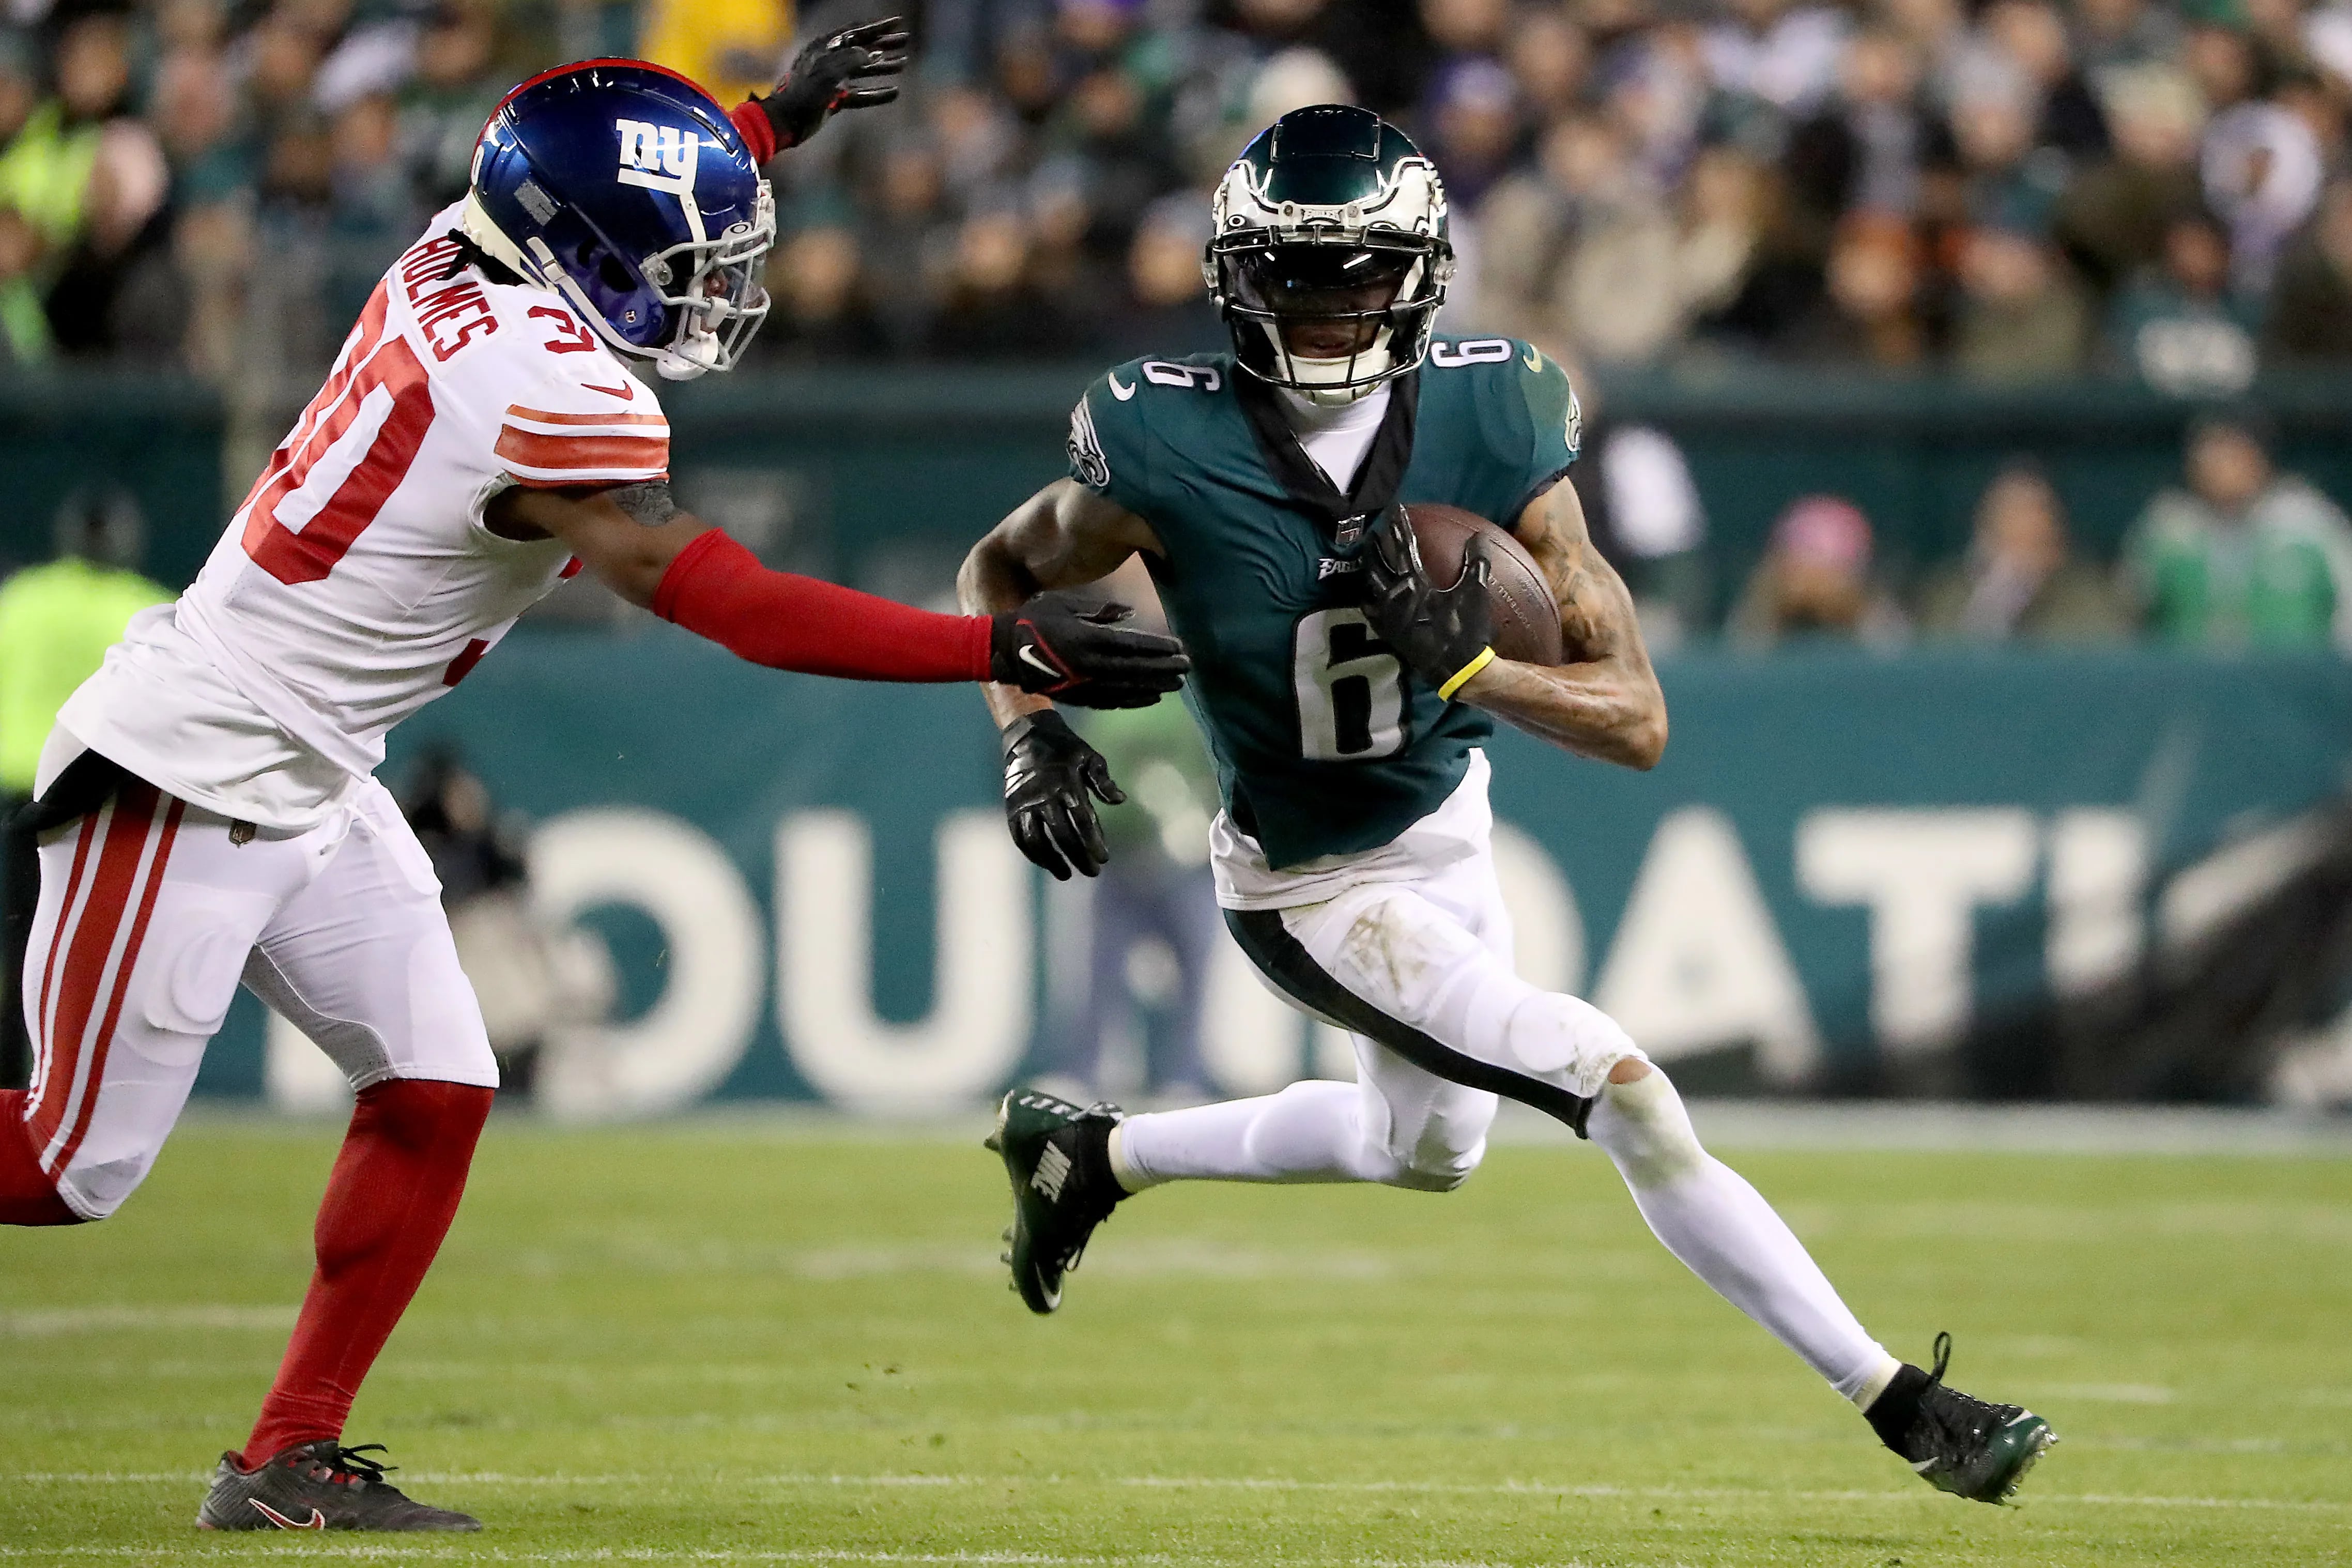 Philadelphia Eagles wide receiver DeVonta Smith makes a play against New York Giants cornerback Darnay Holmes during last season's NFC divisional playoff game at Lincoln Financial Field.